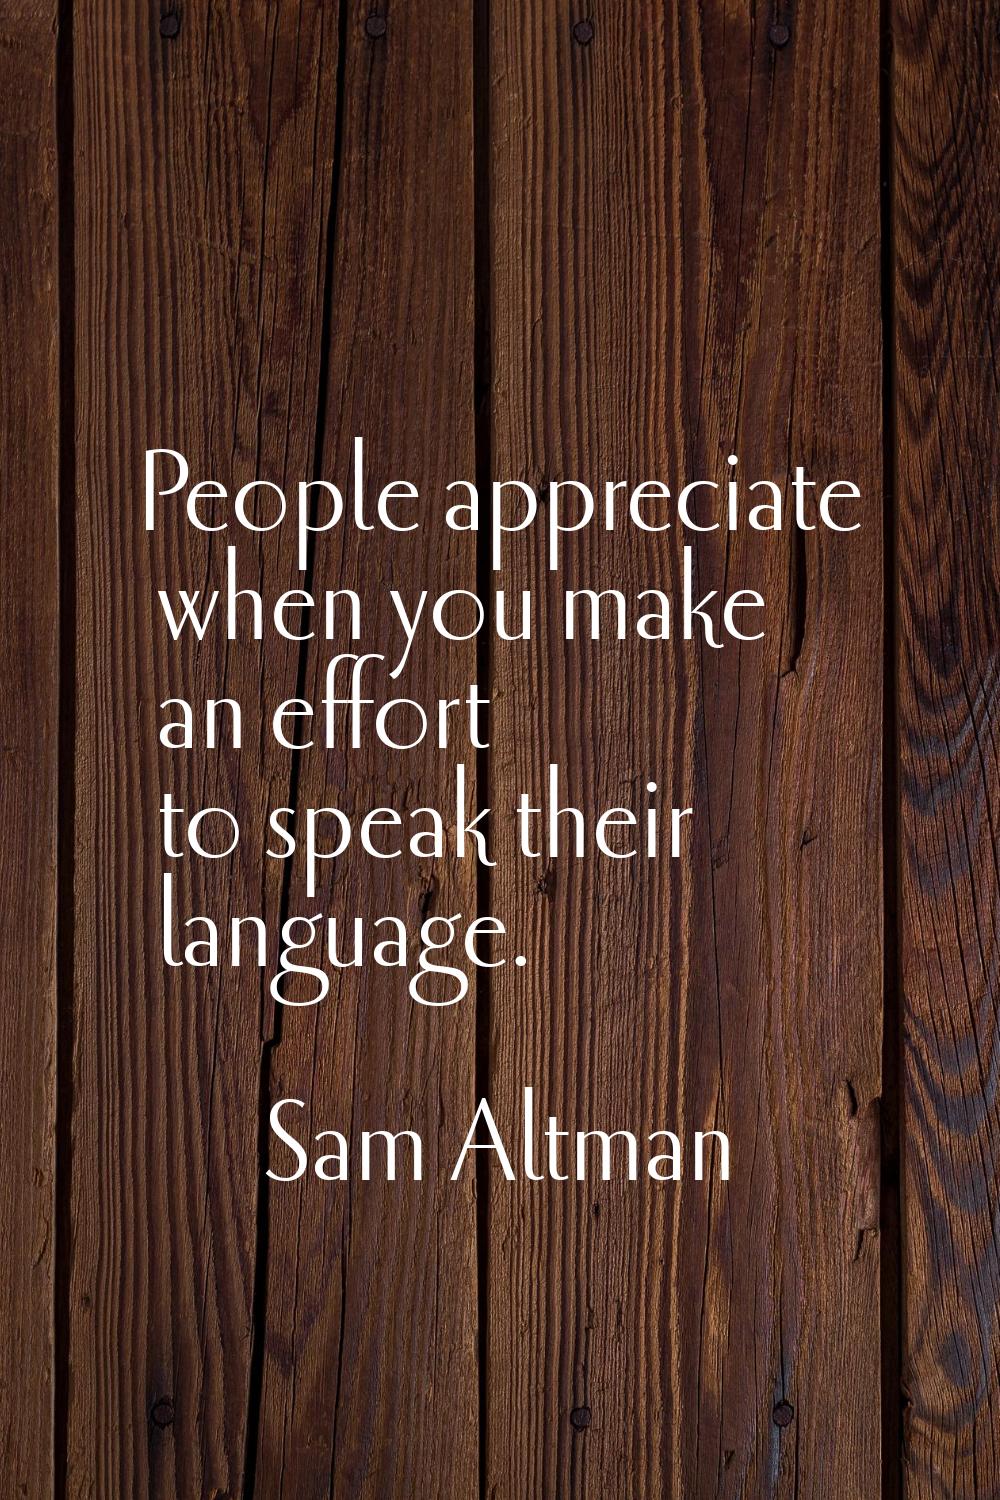 People appreciate when you make an effort to speak their language.